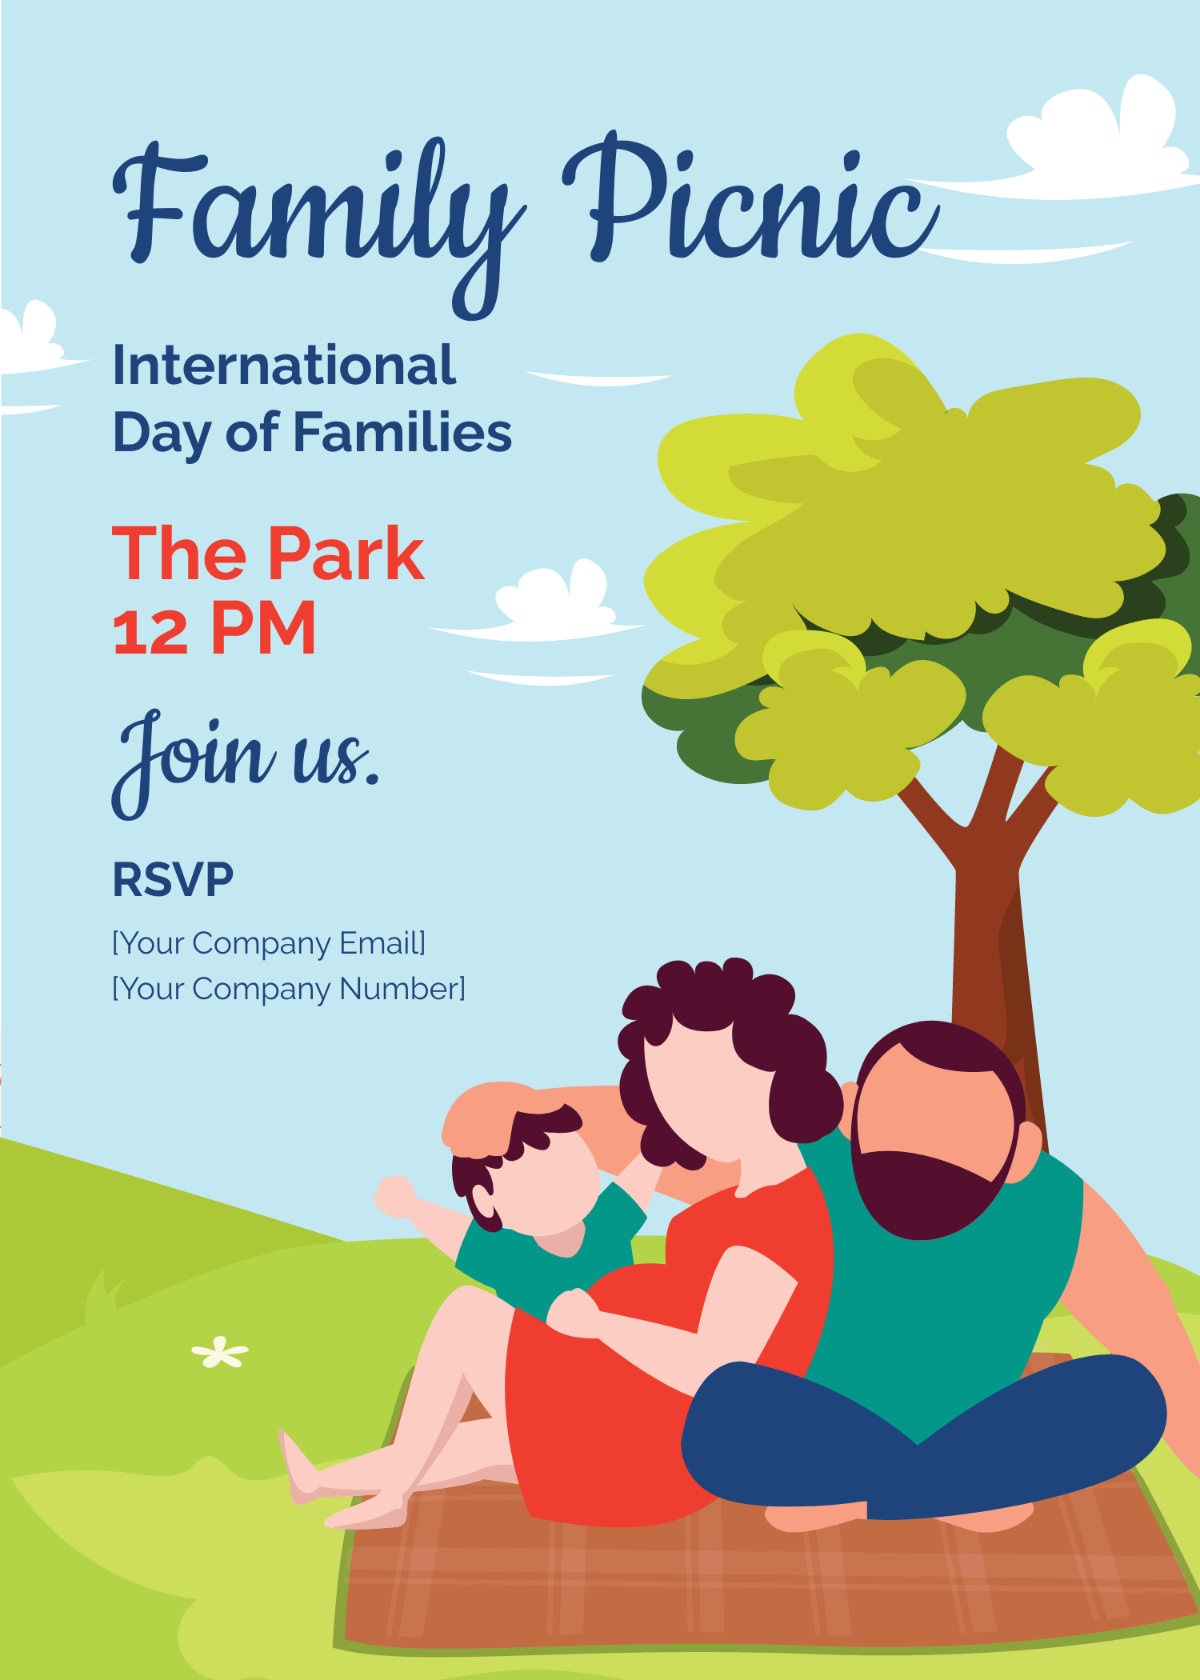 International Day of Families Invitation Card